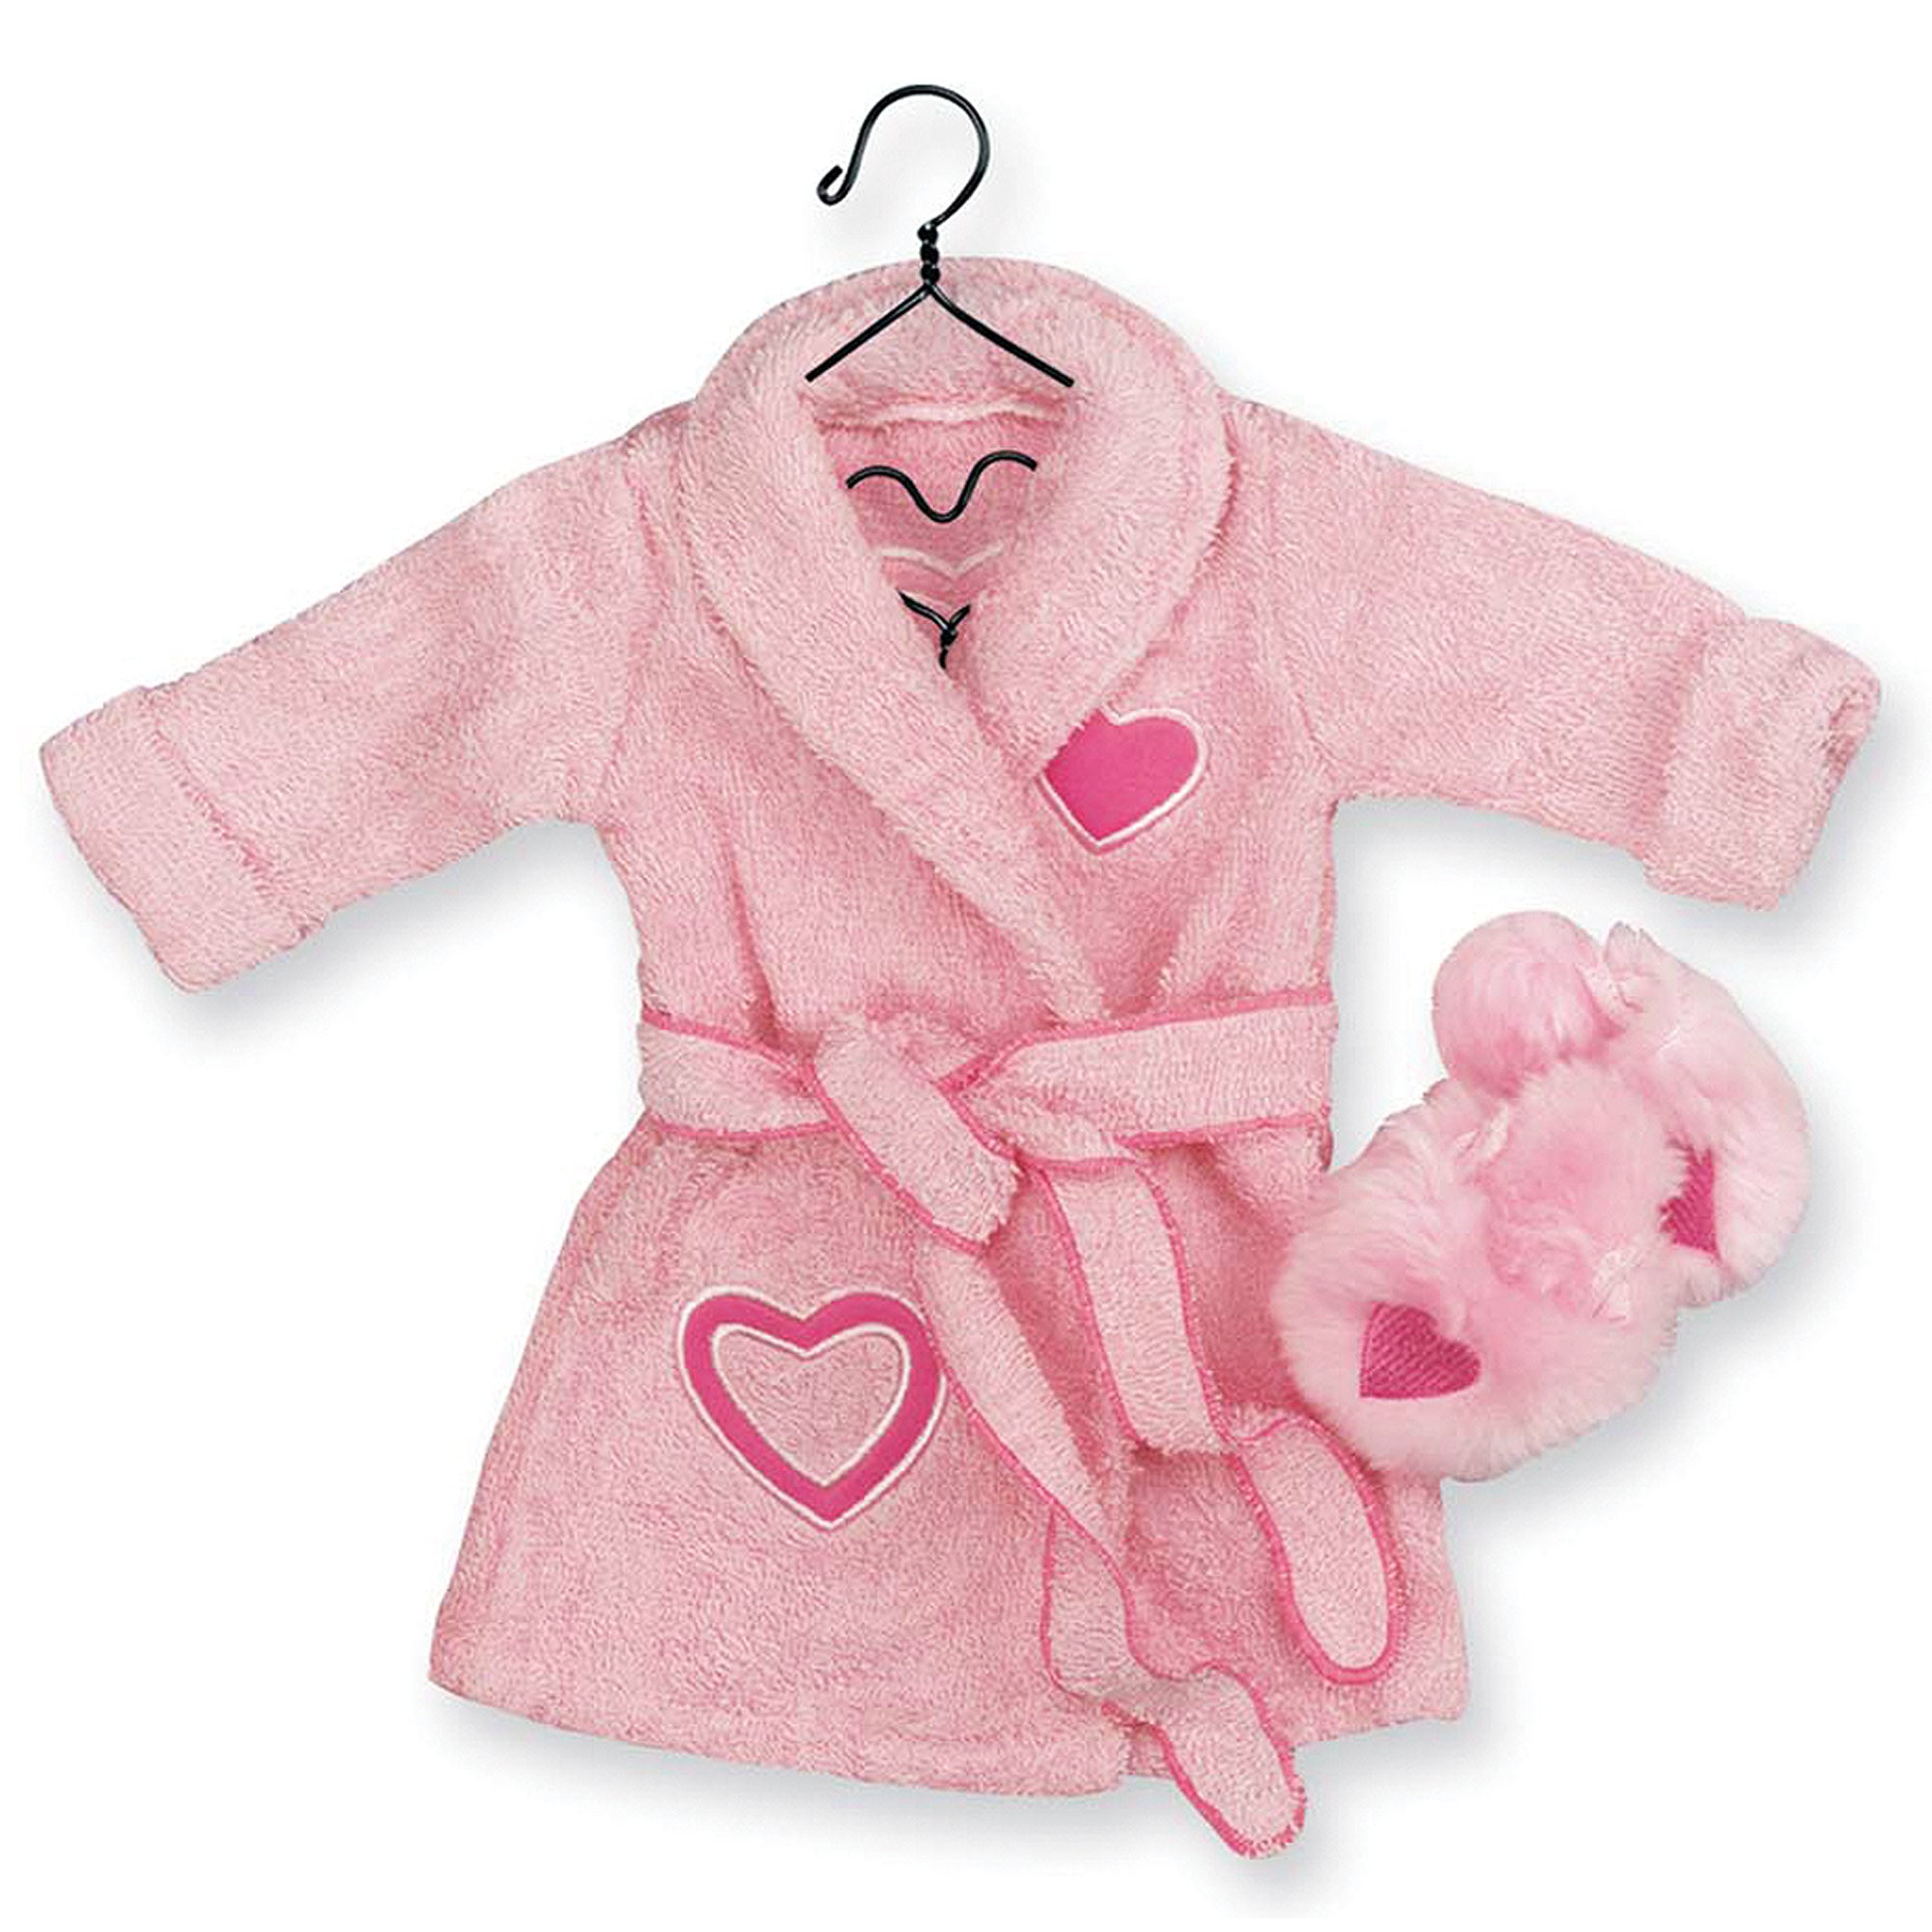 Sophia’s Fuzzy Terrycloth Robe & Matching Fluffy Slippers Set with Cute Heart Appliques for 18” Dolls, Pink